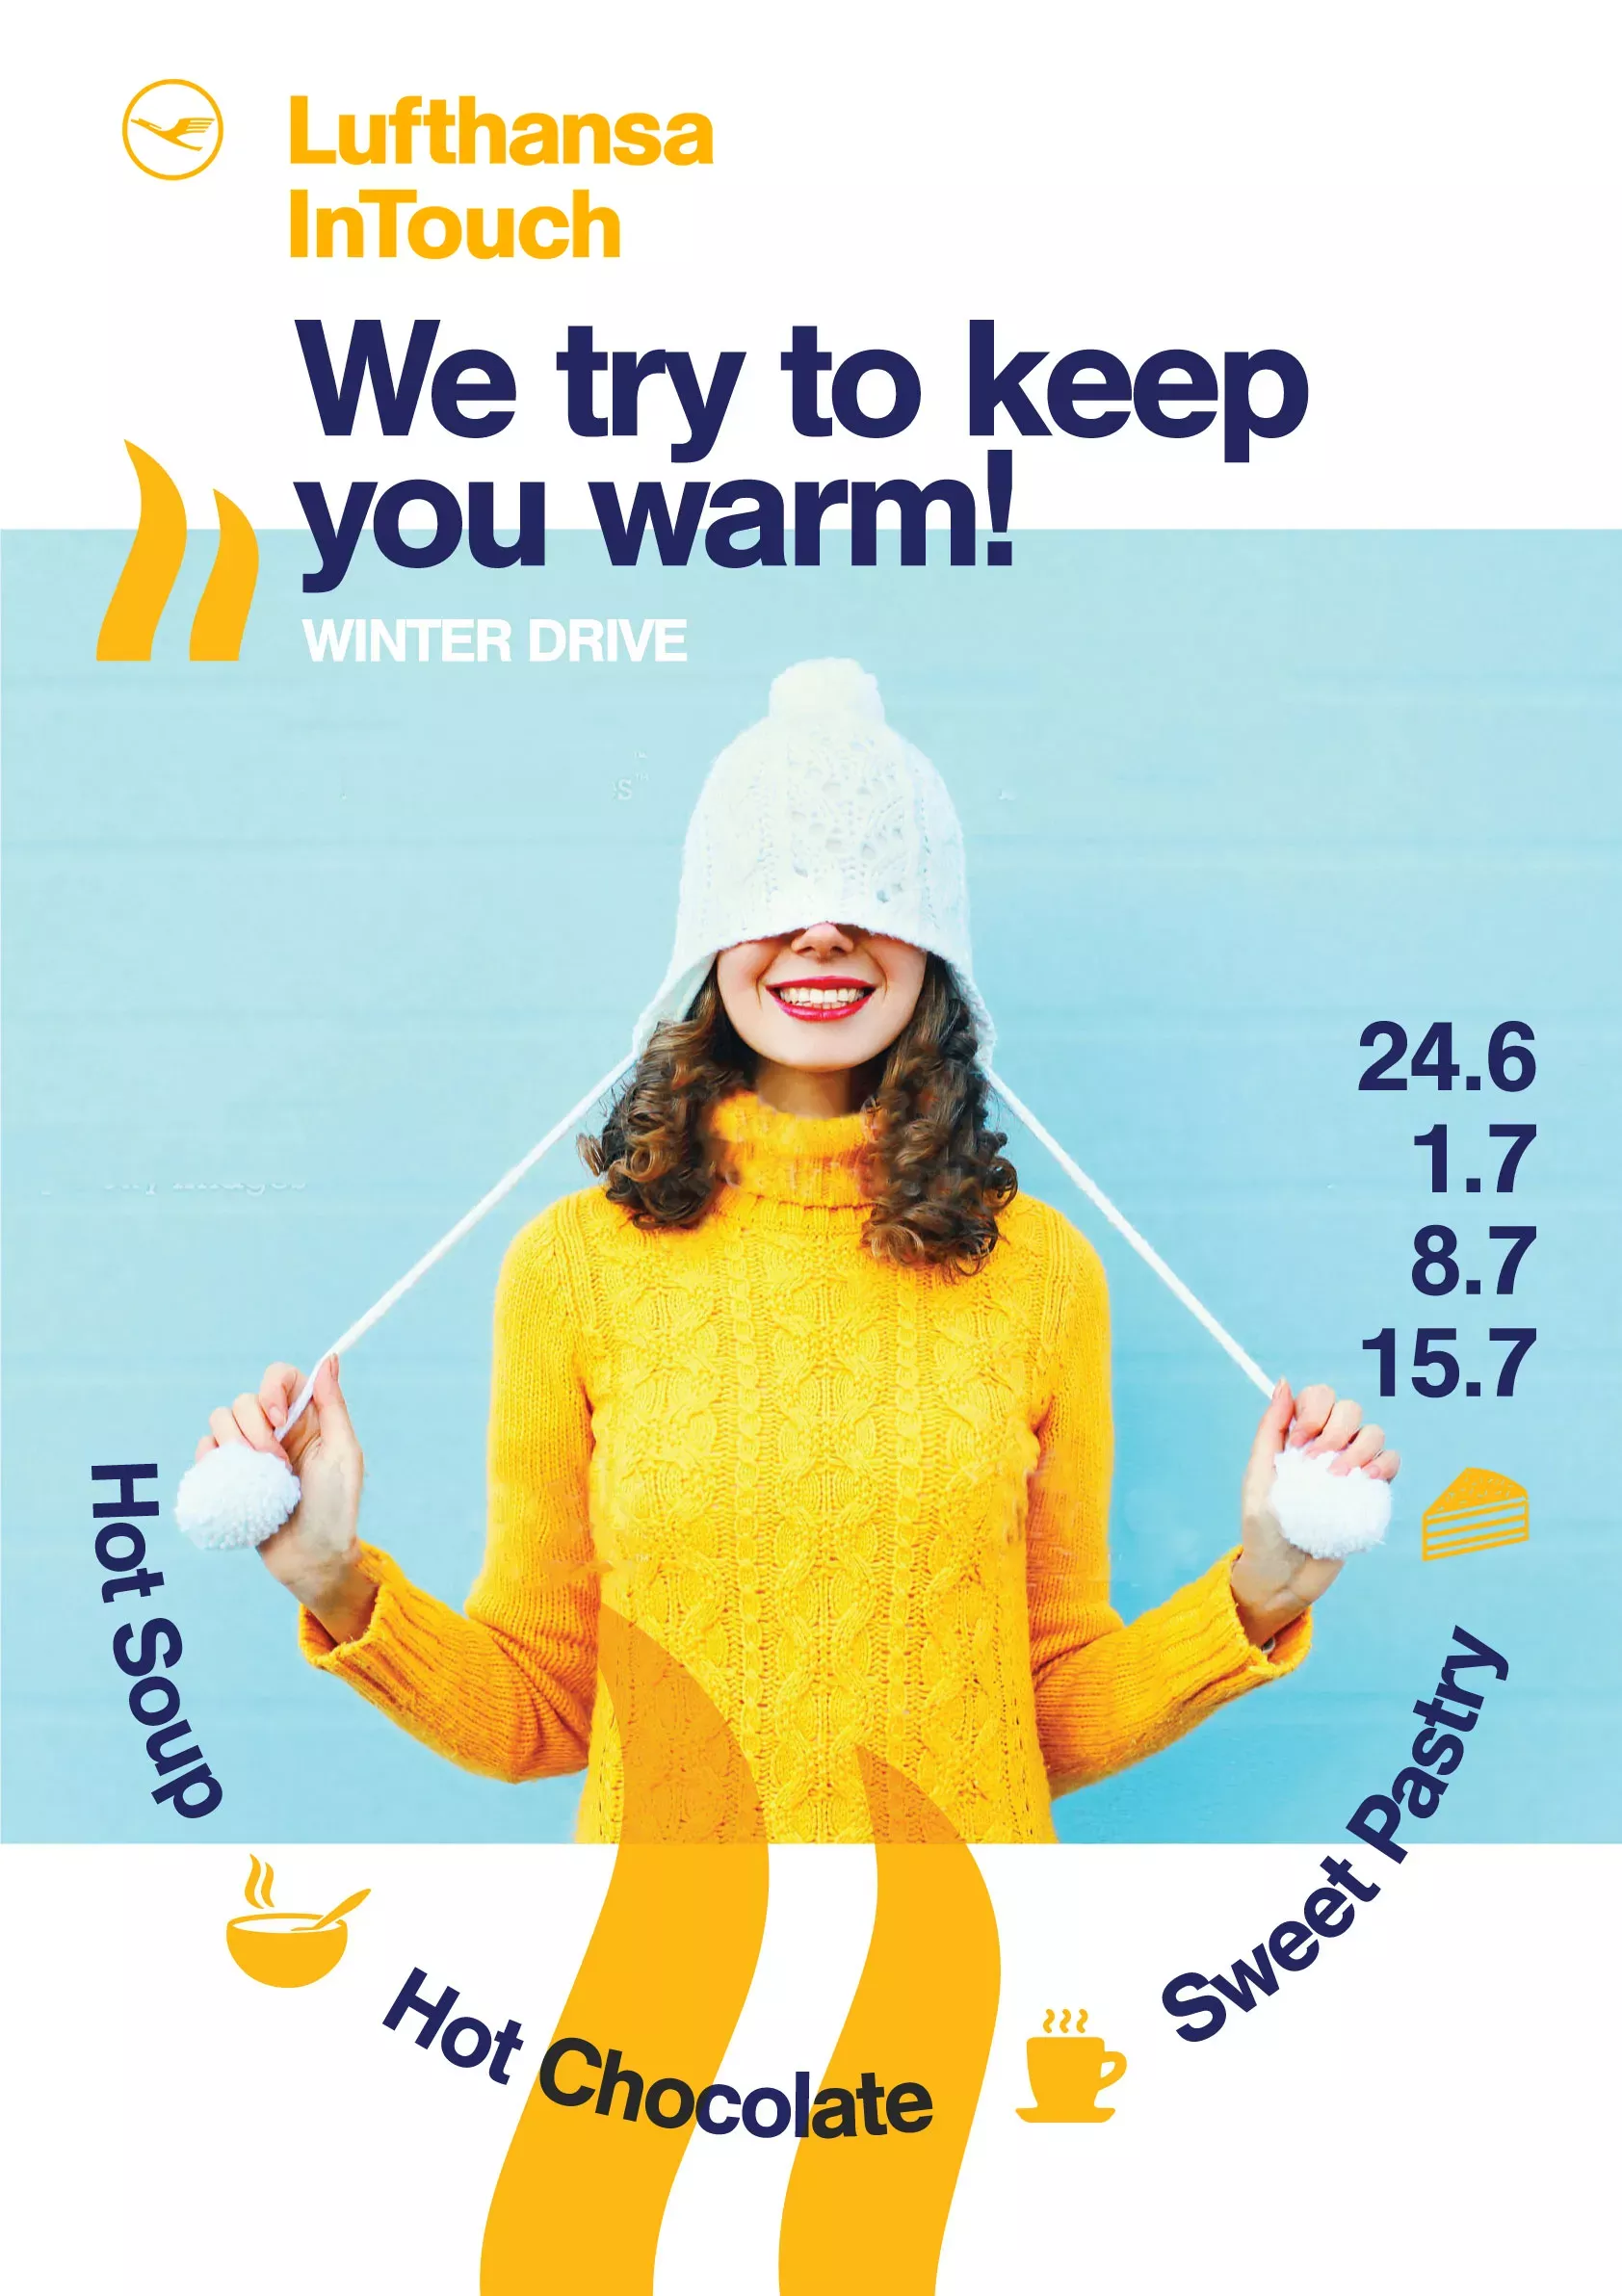 Lufthansa intouch winter drive poster